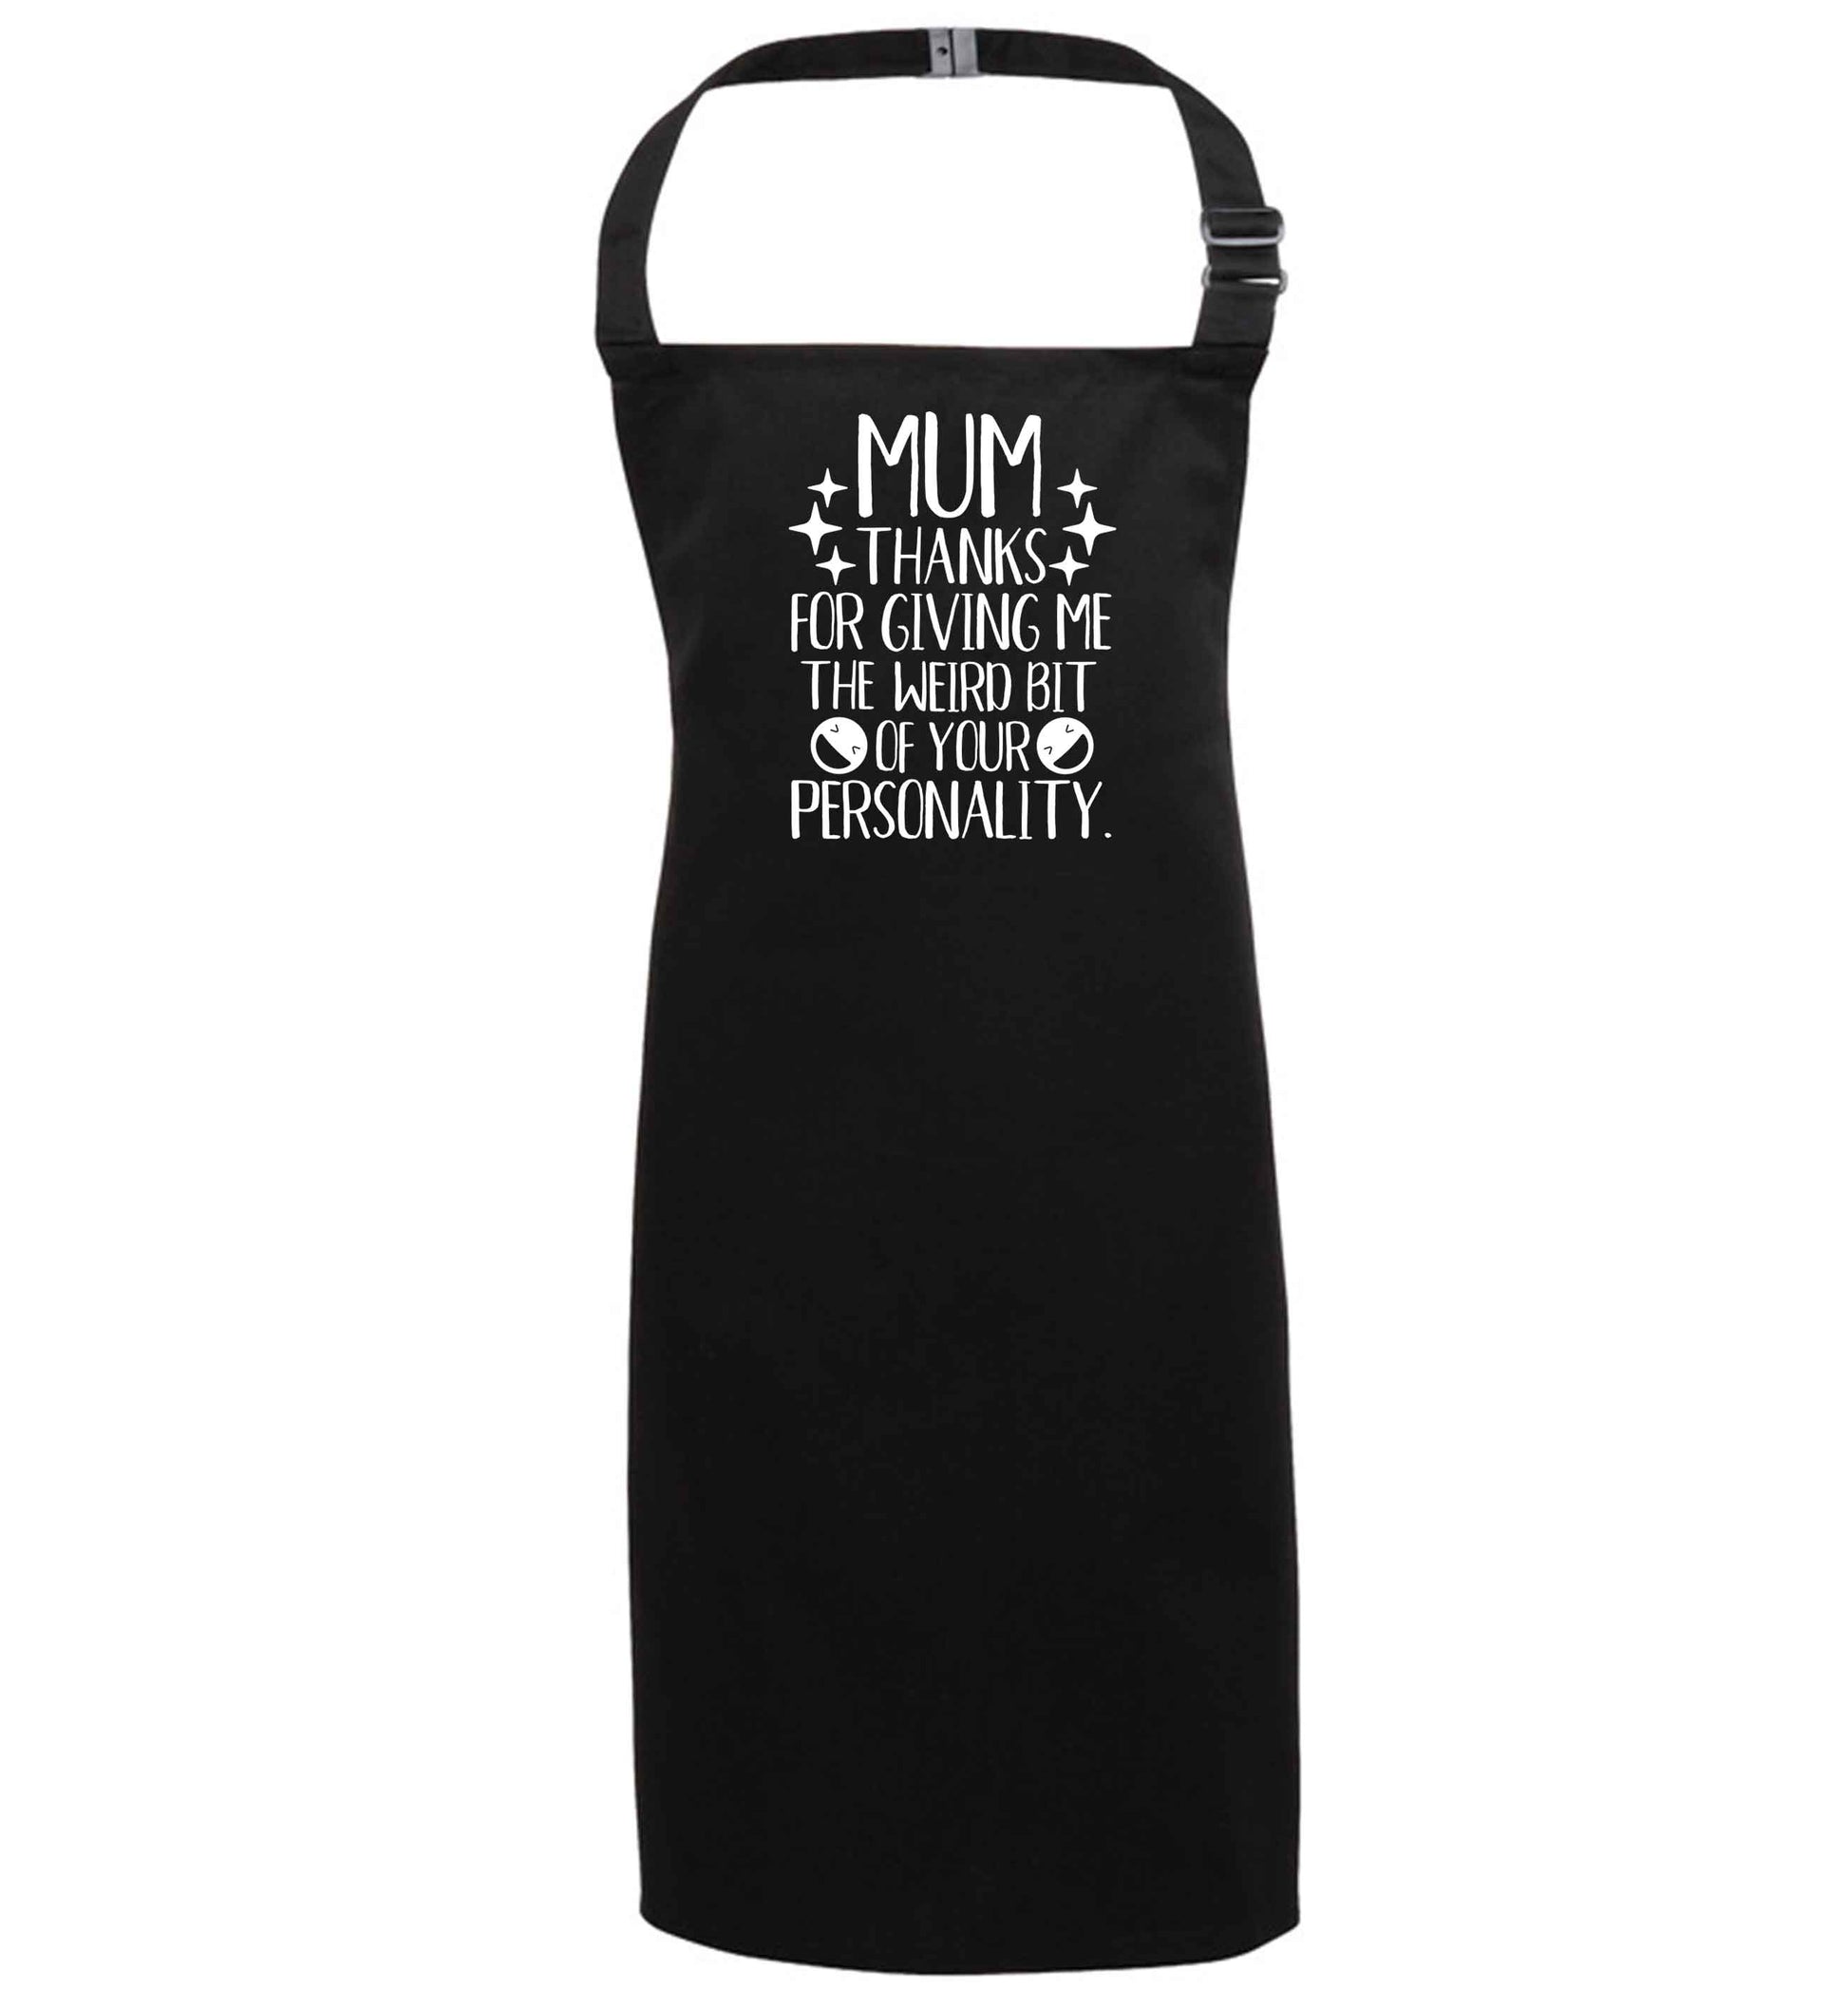 Mum, I love you more than halloumi and if you know me at all you know how deep that is black apron 7-10 years